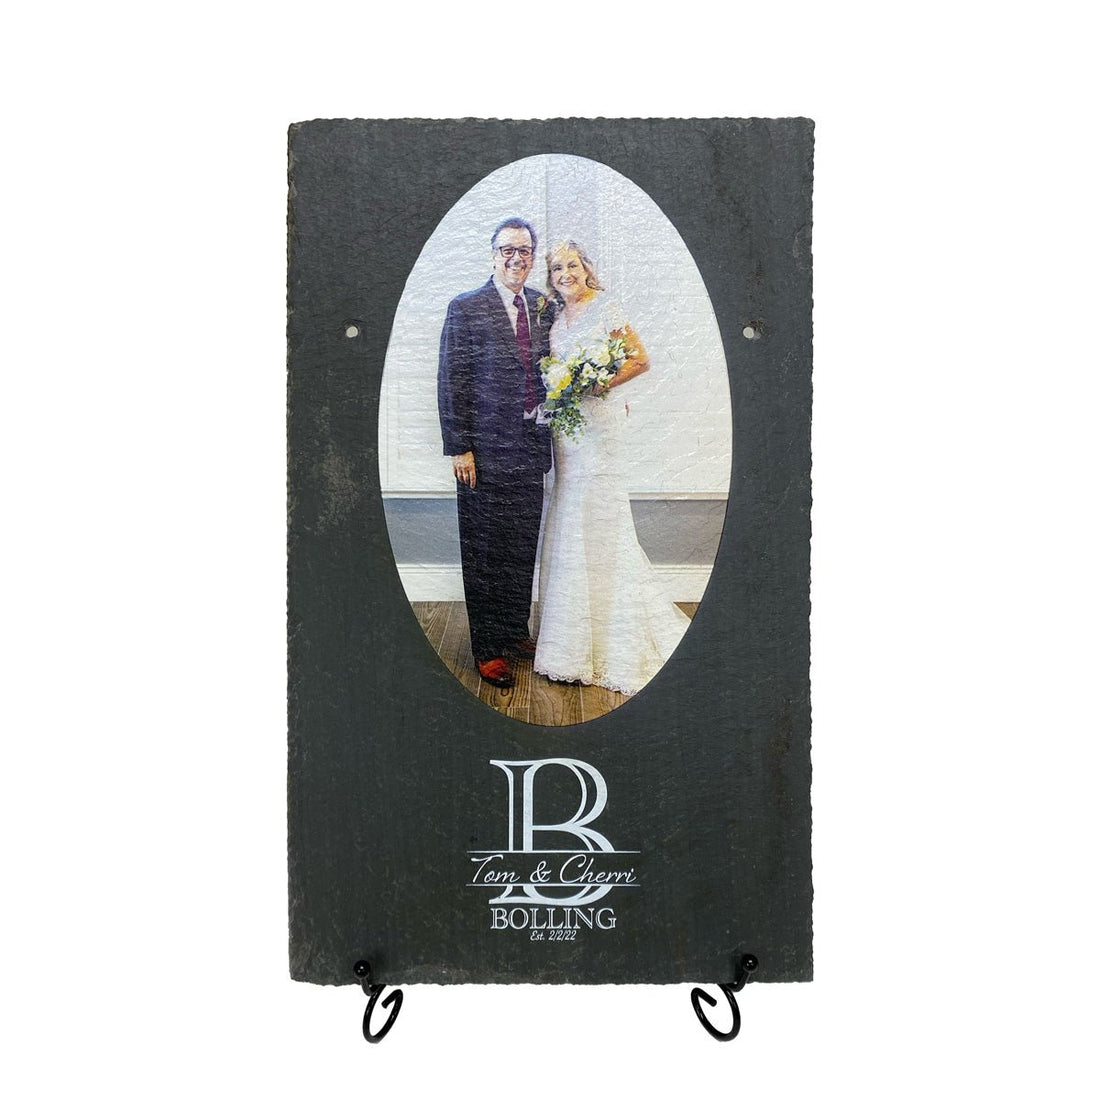 Personalized UV Printed Image (Portrait Format) and Text on Beautiful Charcoal Slate